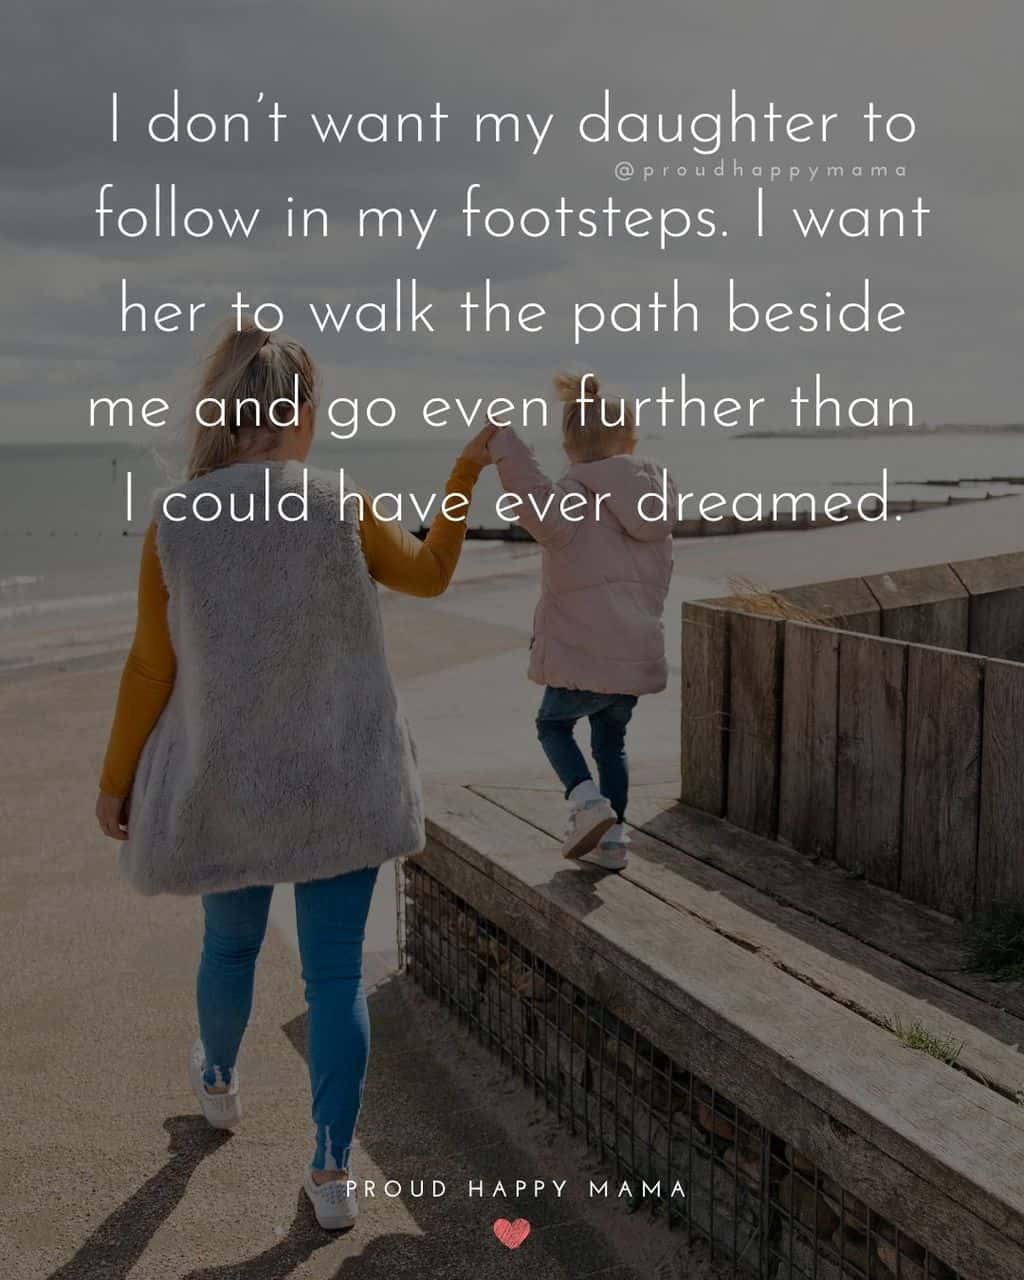 quote for my daughter - ‘I don’t want my daughter to follow in my footsteps. I want her to walk the path beside me and go even further